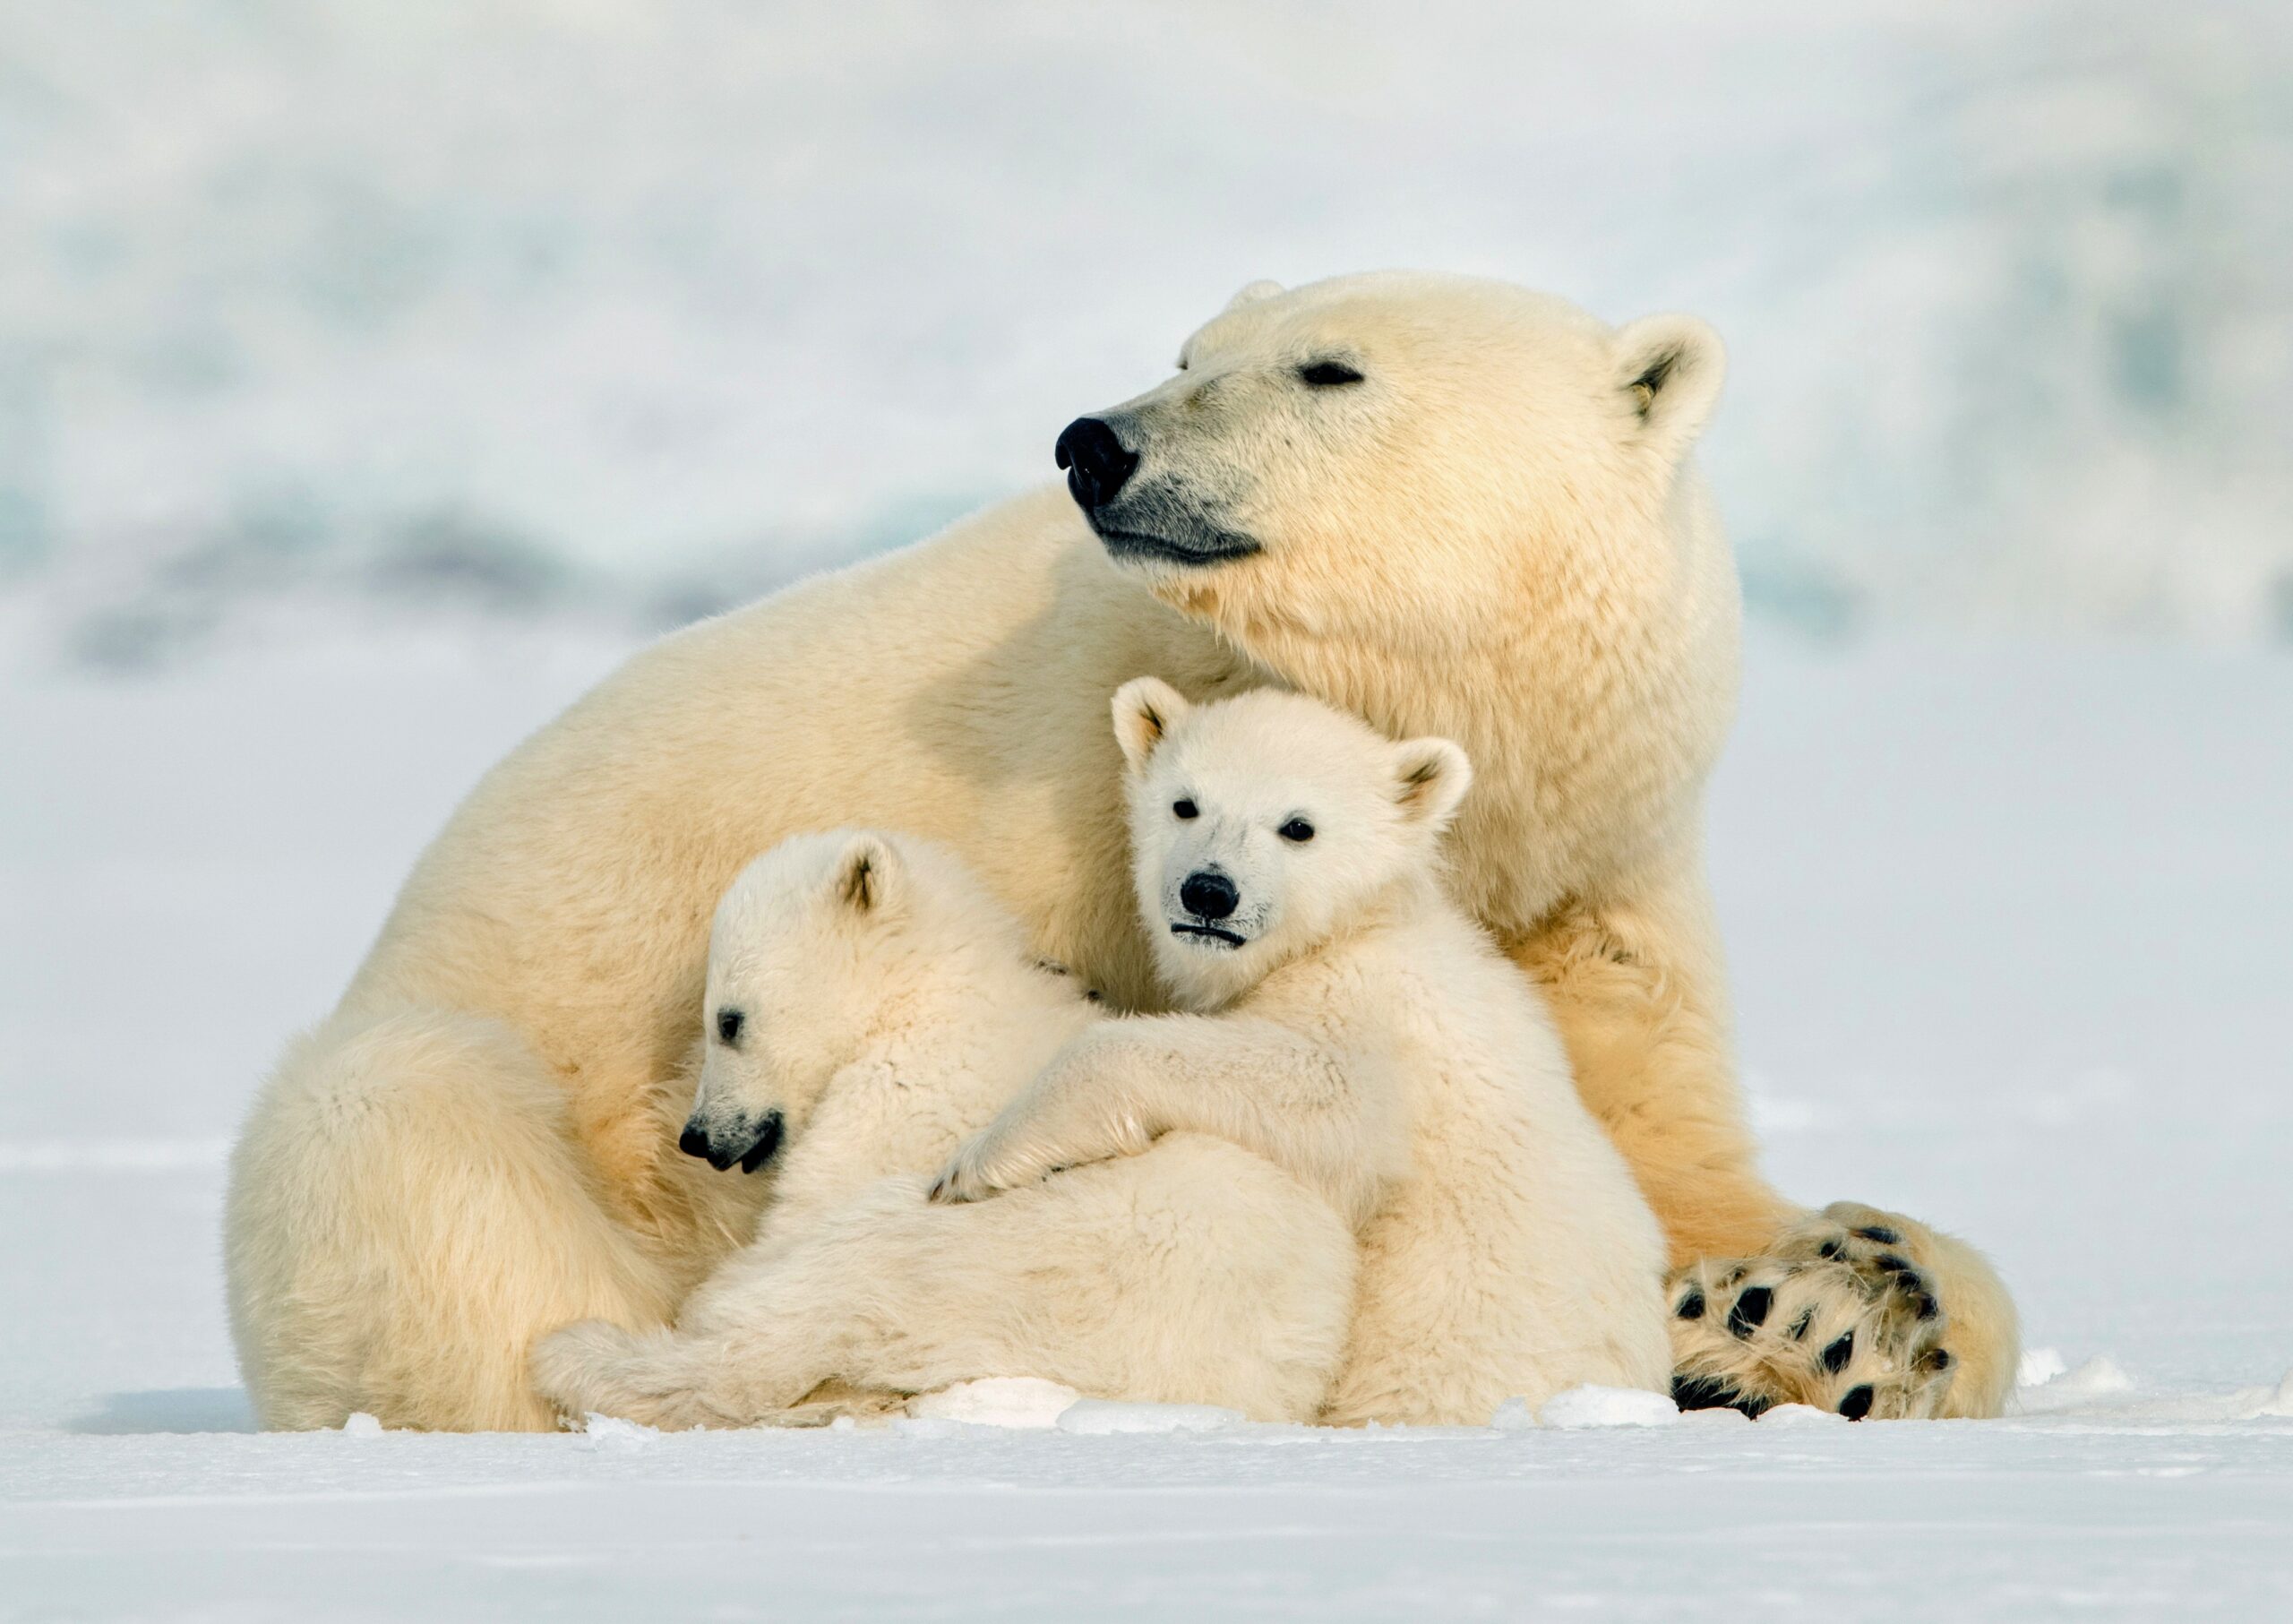 13 interesting facts about Polar bear